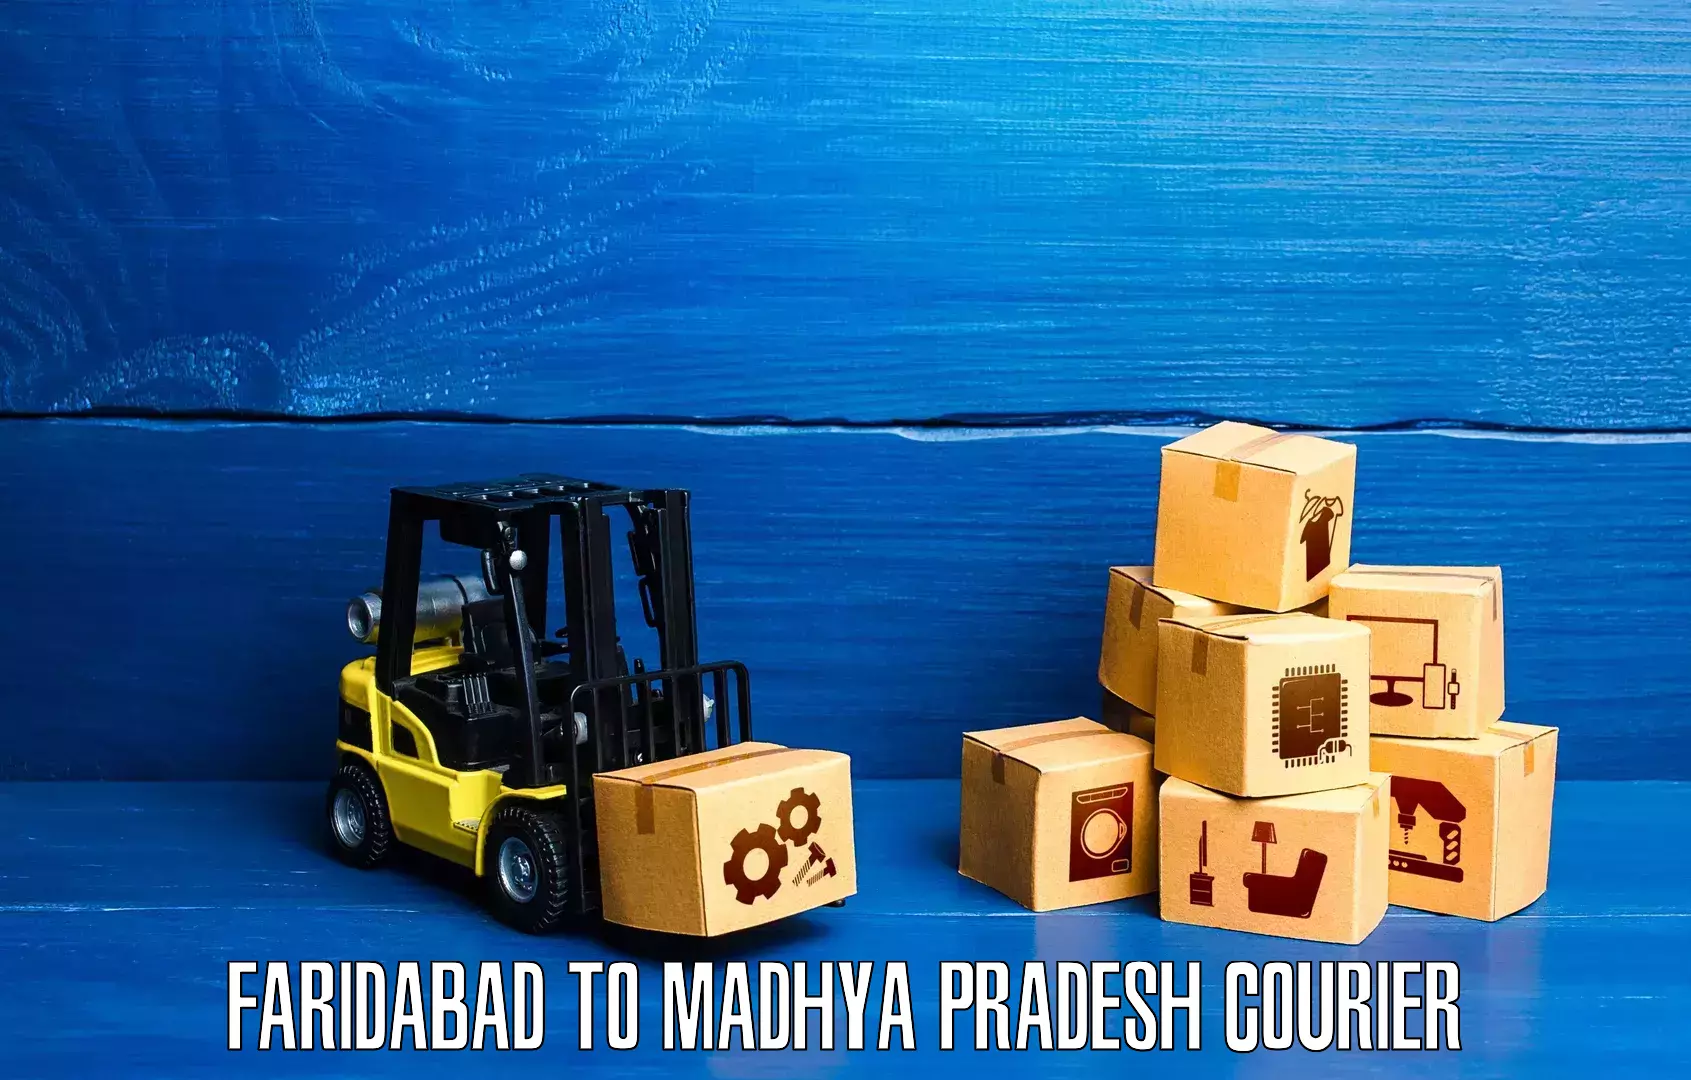 State-of-the-art courier technology in Faridabad to Khargone